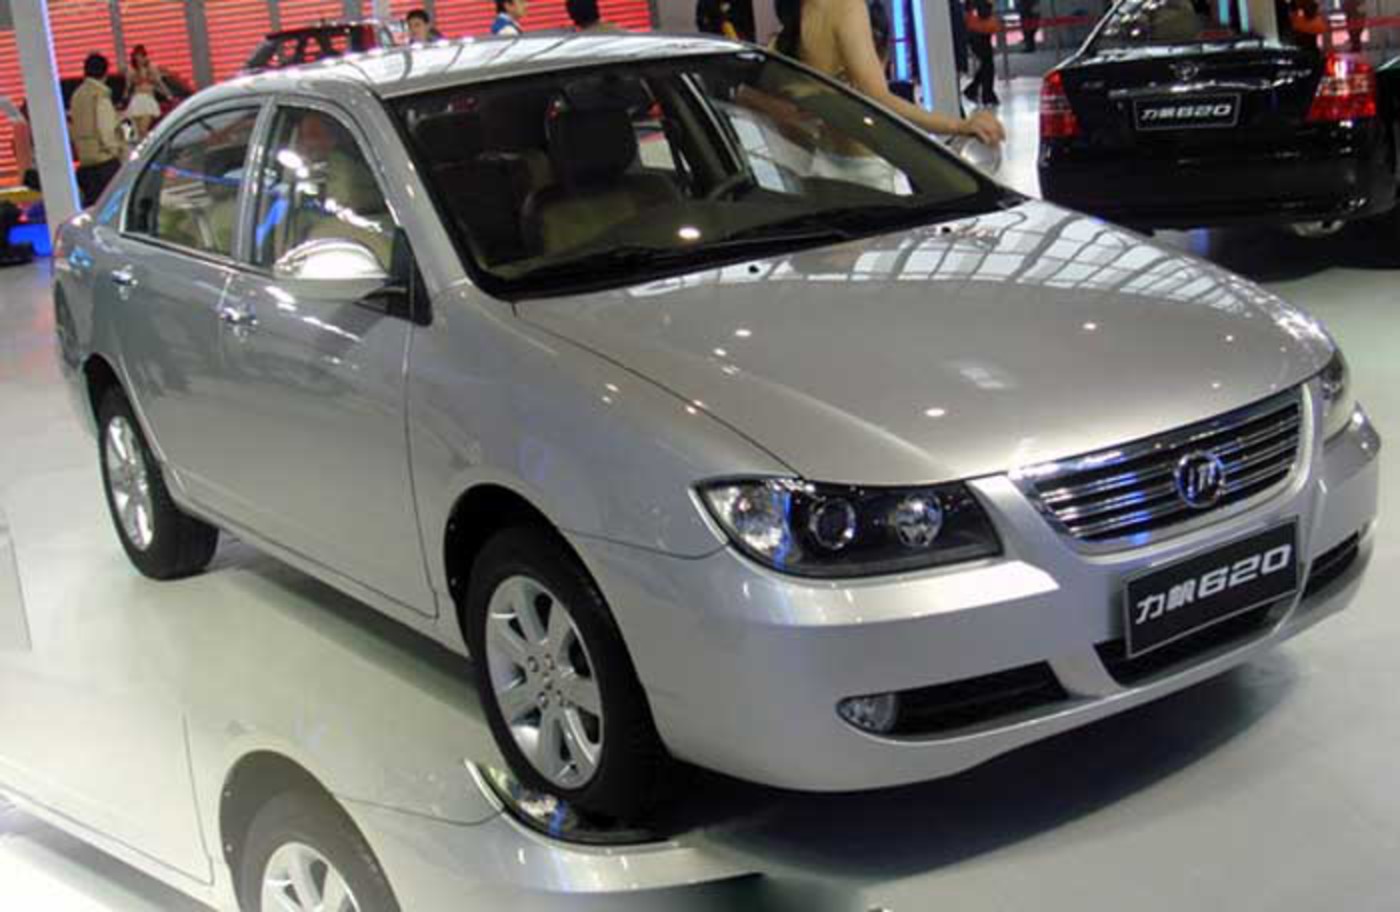 Lifan 620 Talent: Photo gallery, complete information about model ...